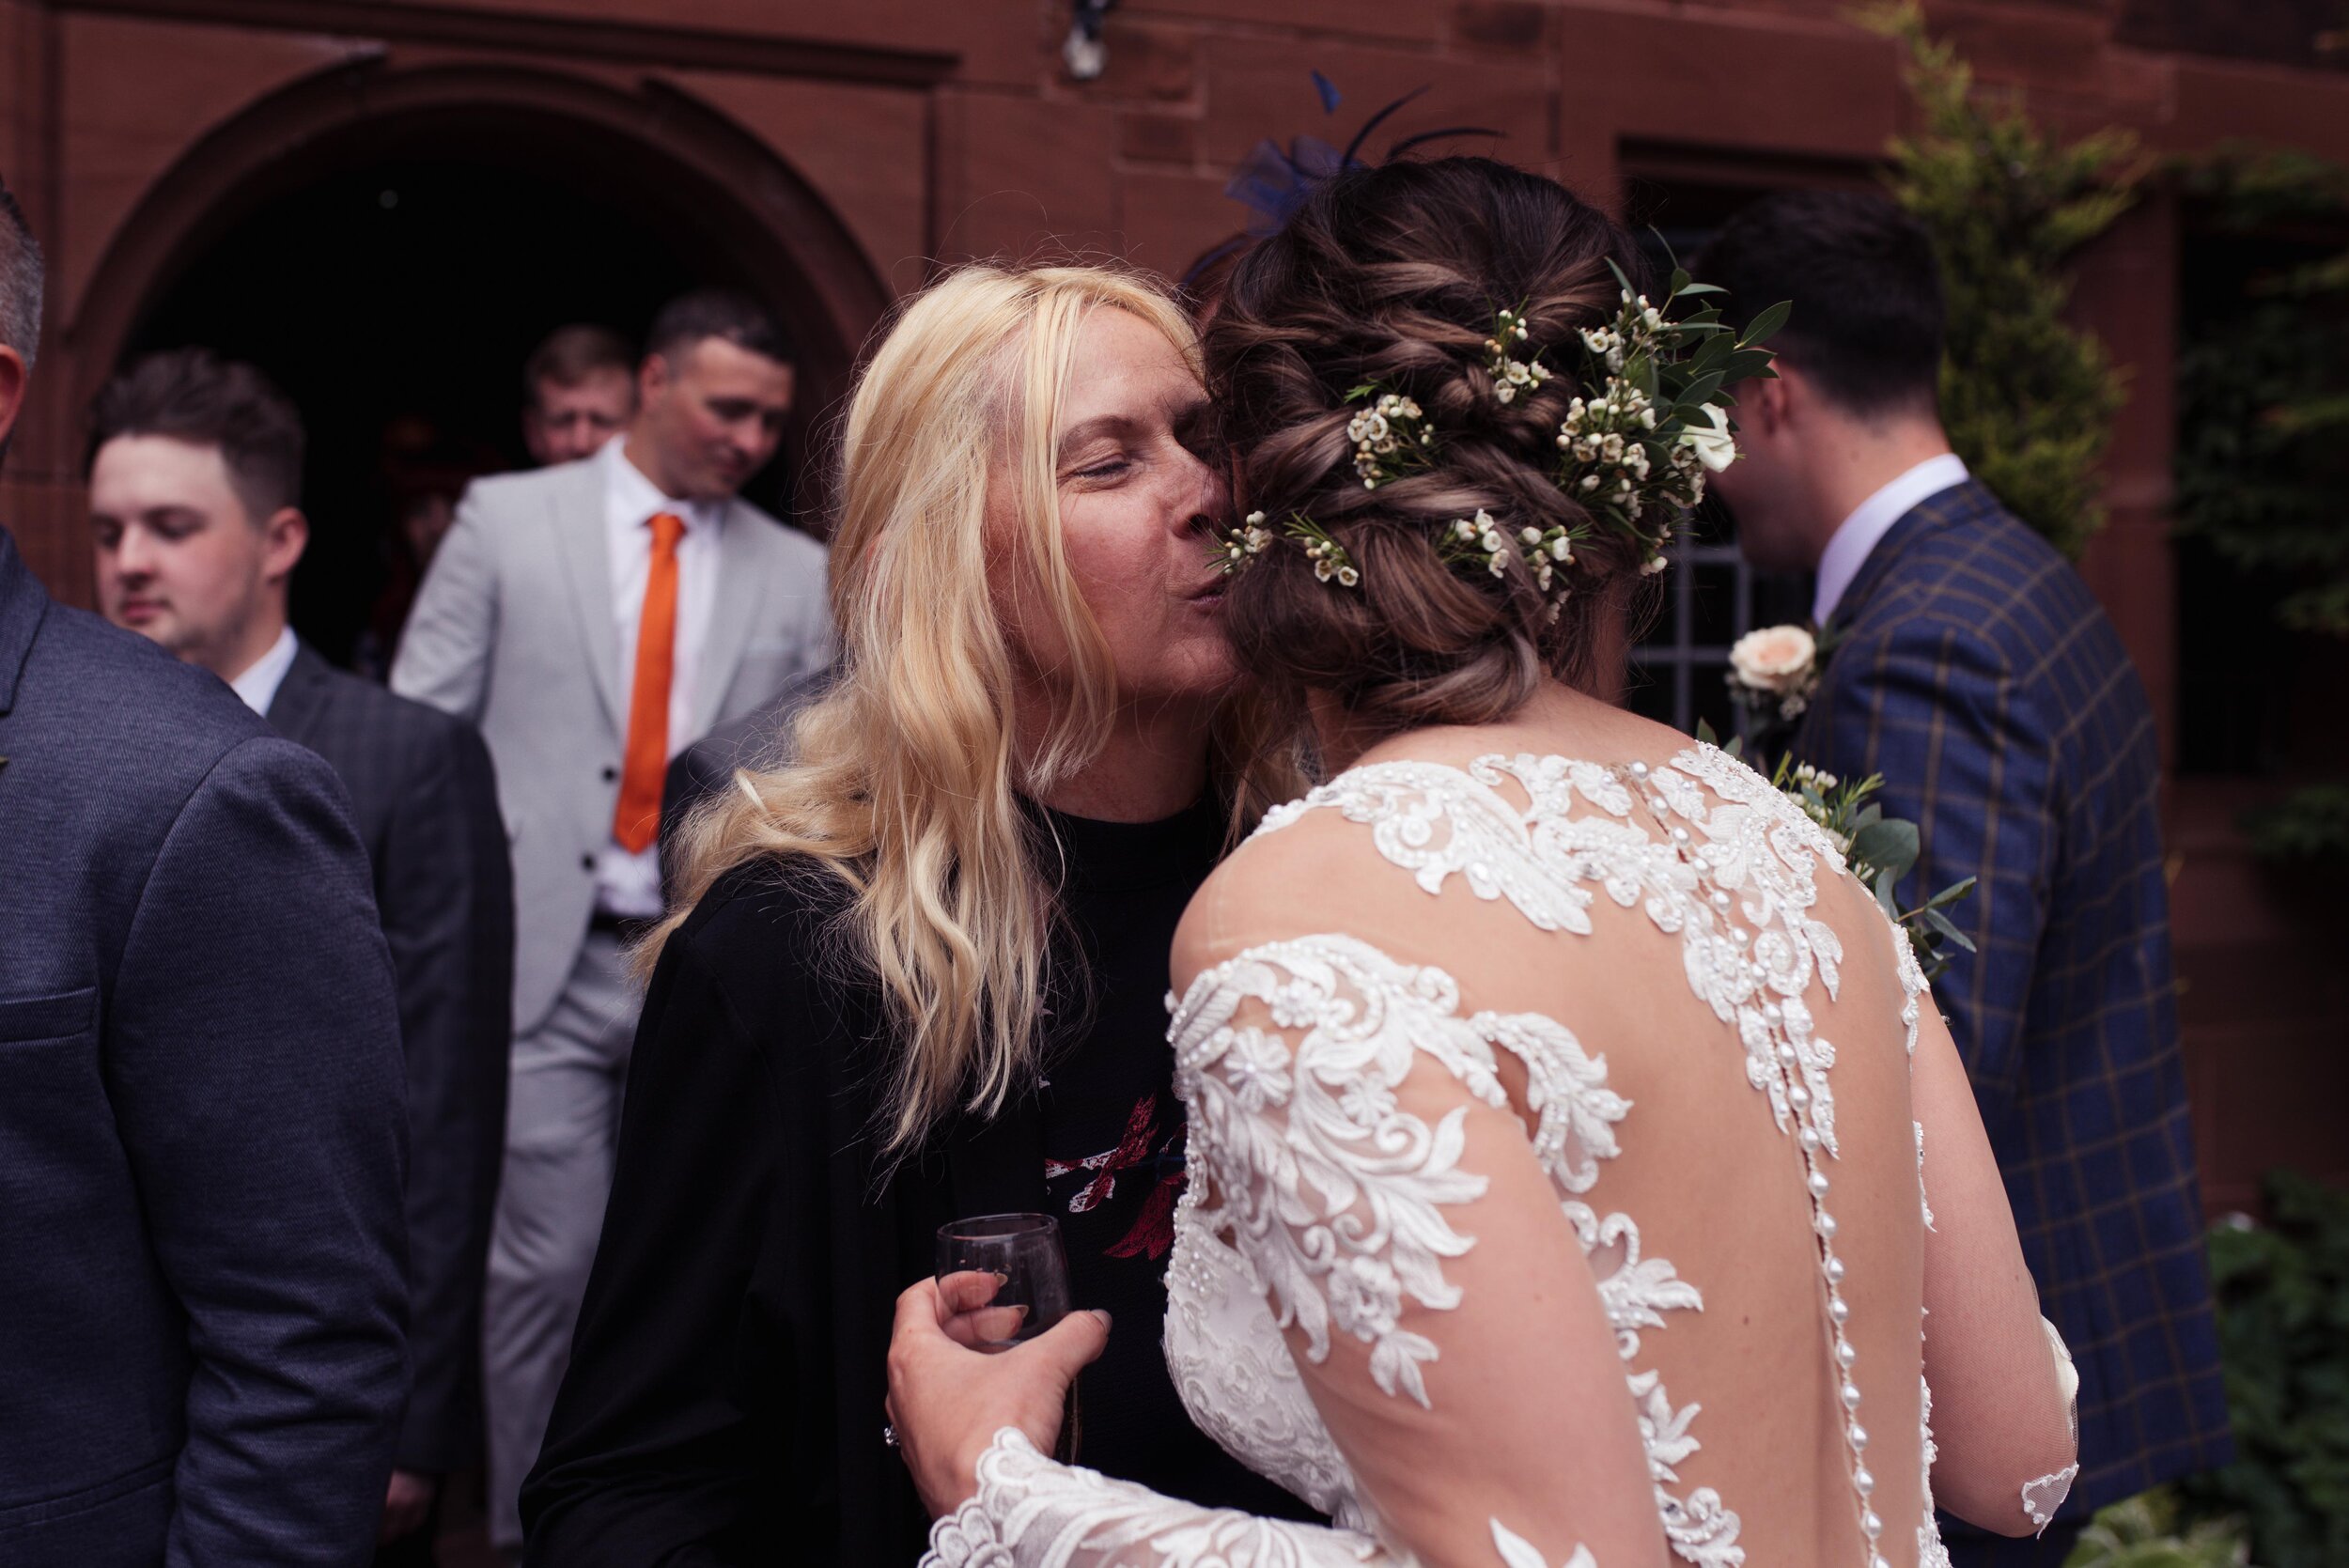 A blonde wedding guest gives the bride a kiss on the cheek